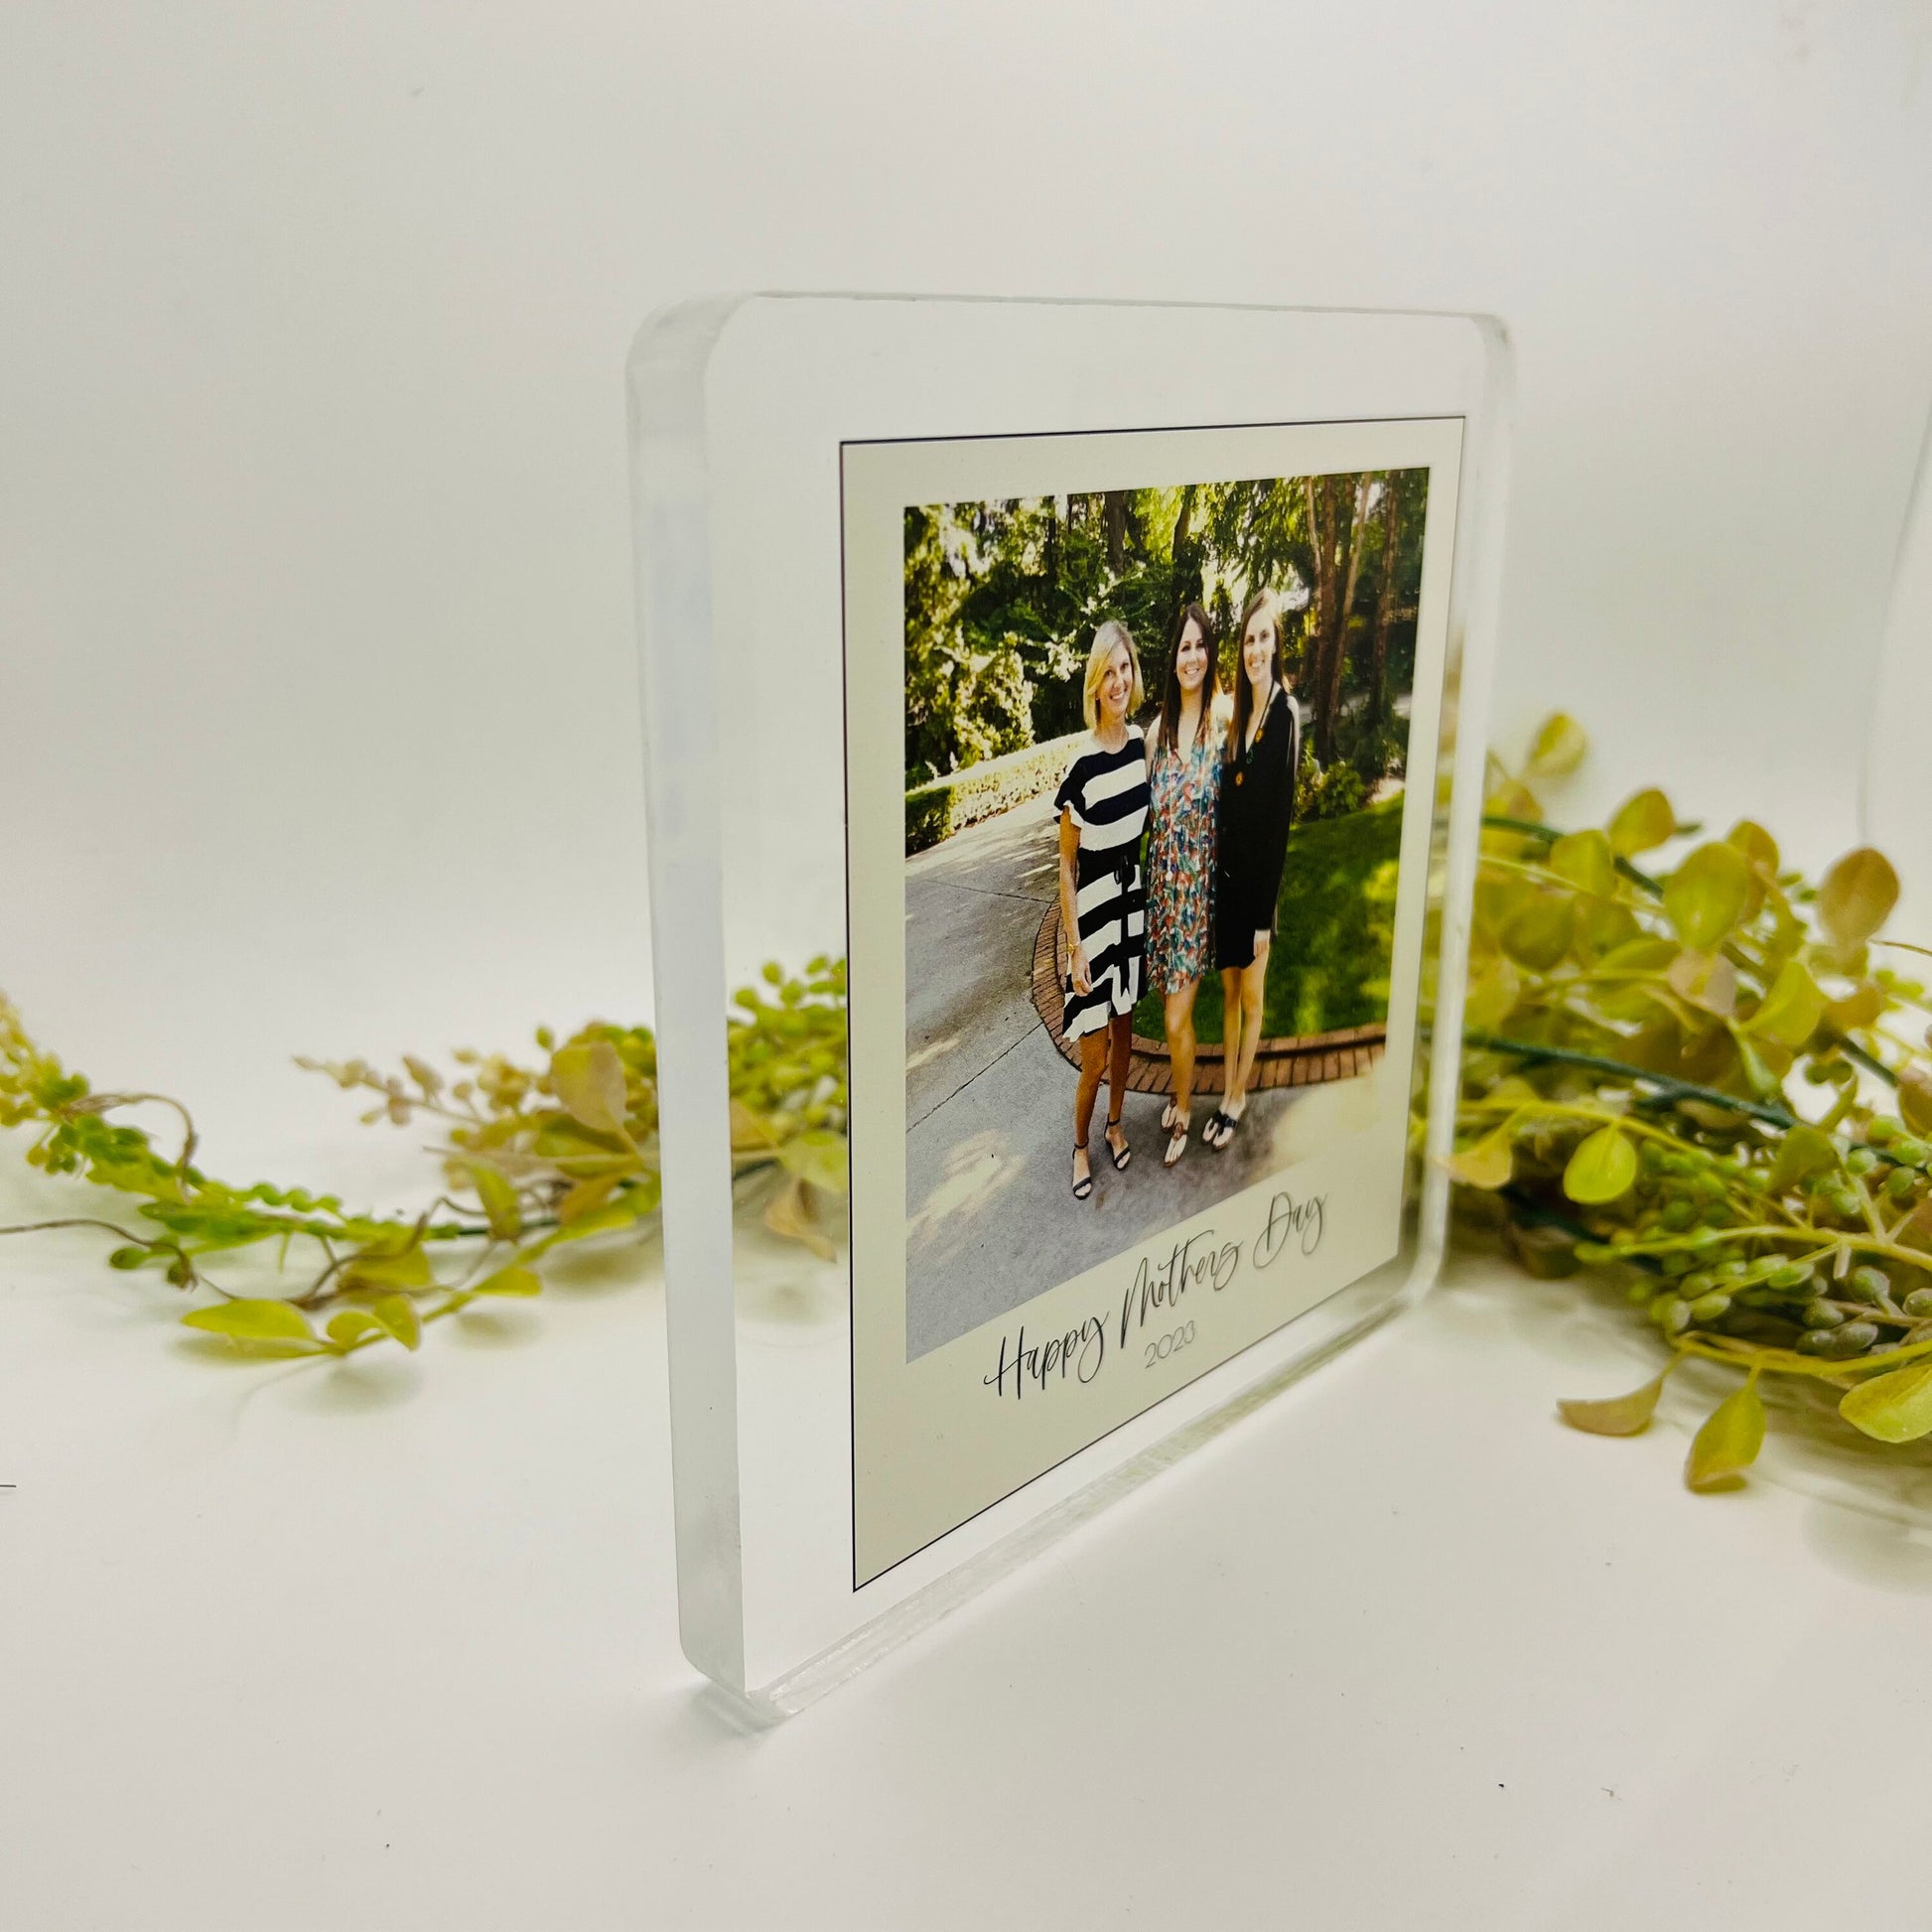 freestanding photo block * your photos, your words * personalized acrylic picture block * Mother’s Day gift